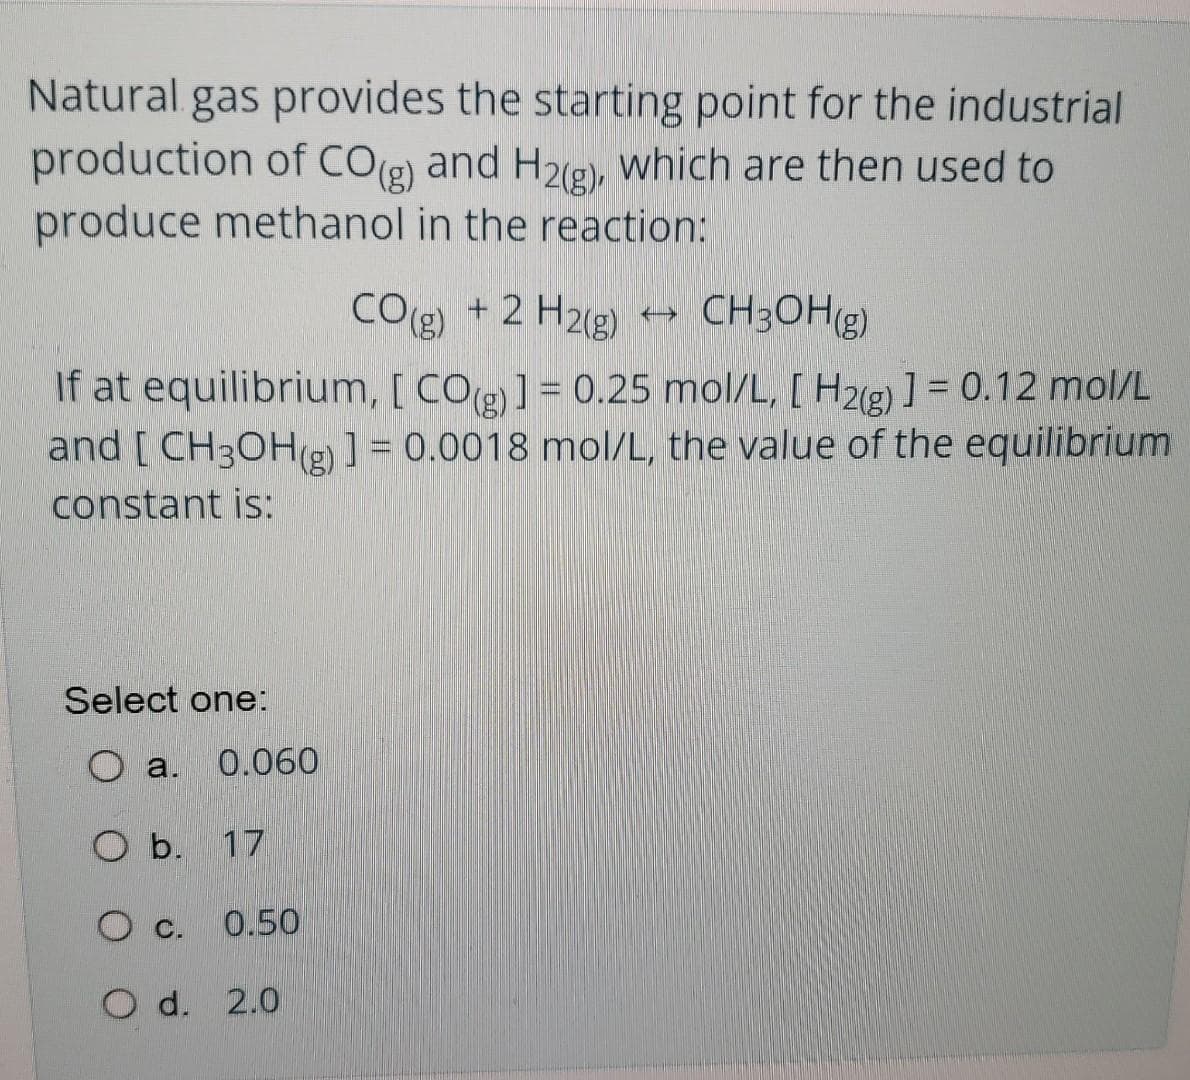 Natural gas provides the starting point for the industrial
production of COg) and H2g), which are then used to
produce methanol in the reaction:
COg) + 2 H2g)
CH3OHg)
If at equilibrium, [ CO(g)] = 0.25 mol/L, [ H2g) ] = 0.12 mol/L
and [ CH3OH(g) ] = 0.0018 mol/L, the value of the equilibrium
constant is:
Select one:
O a.
0.060
O b. 17
0.50
O d. 2.0
